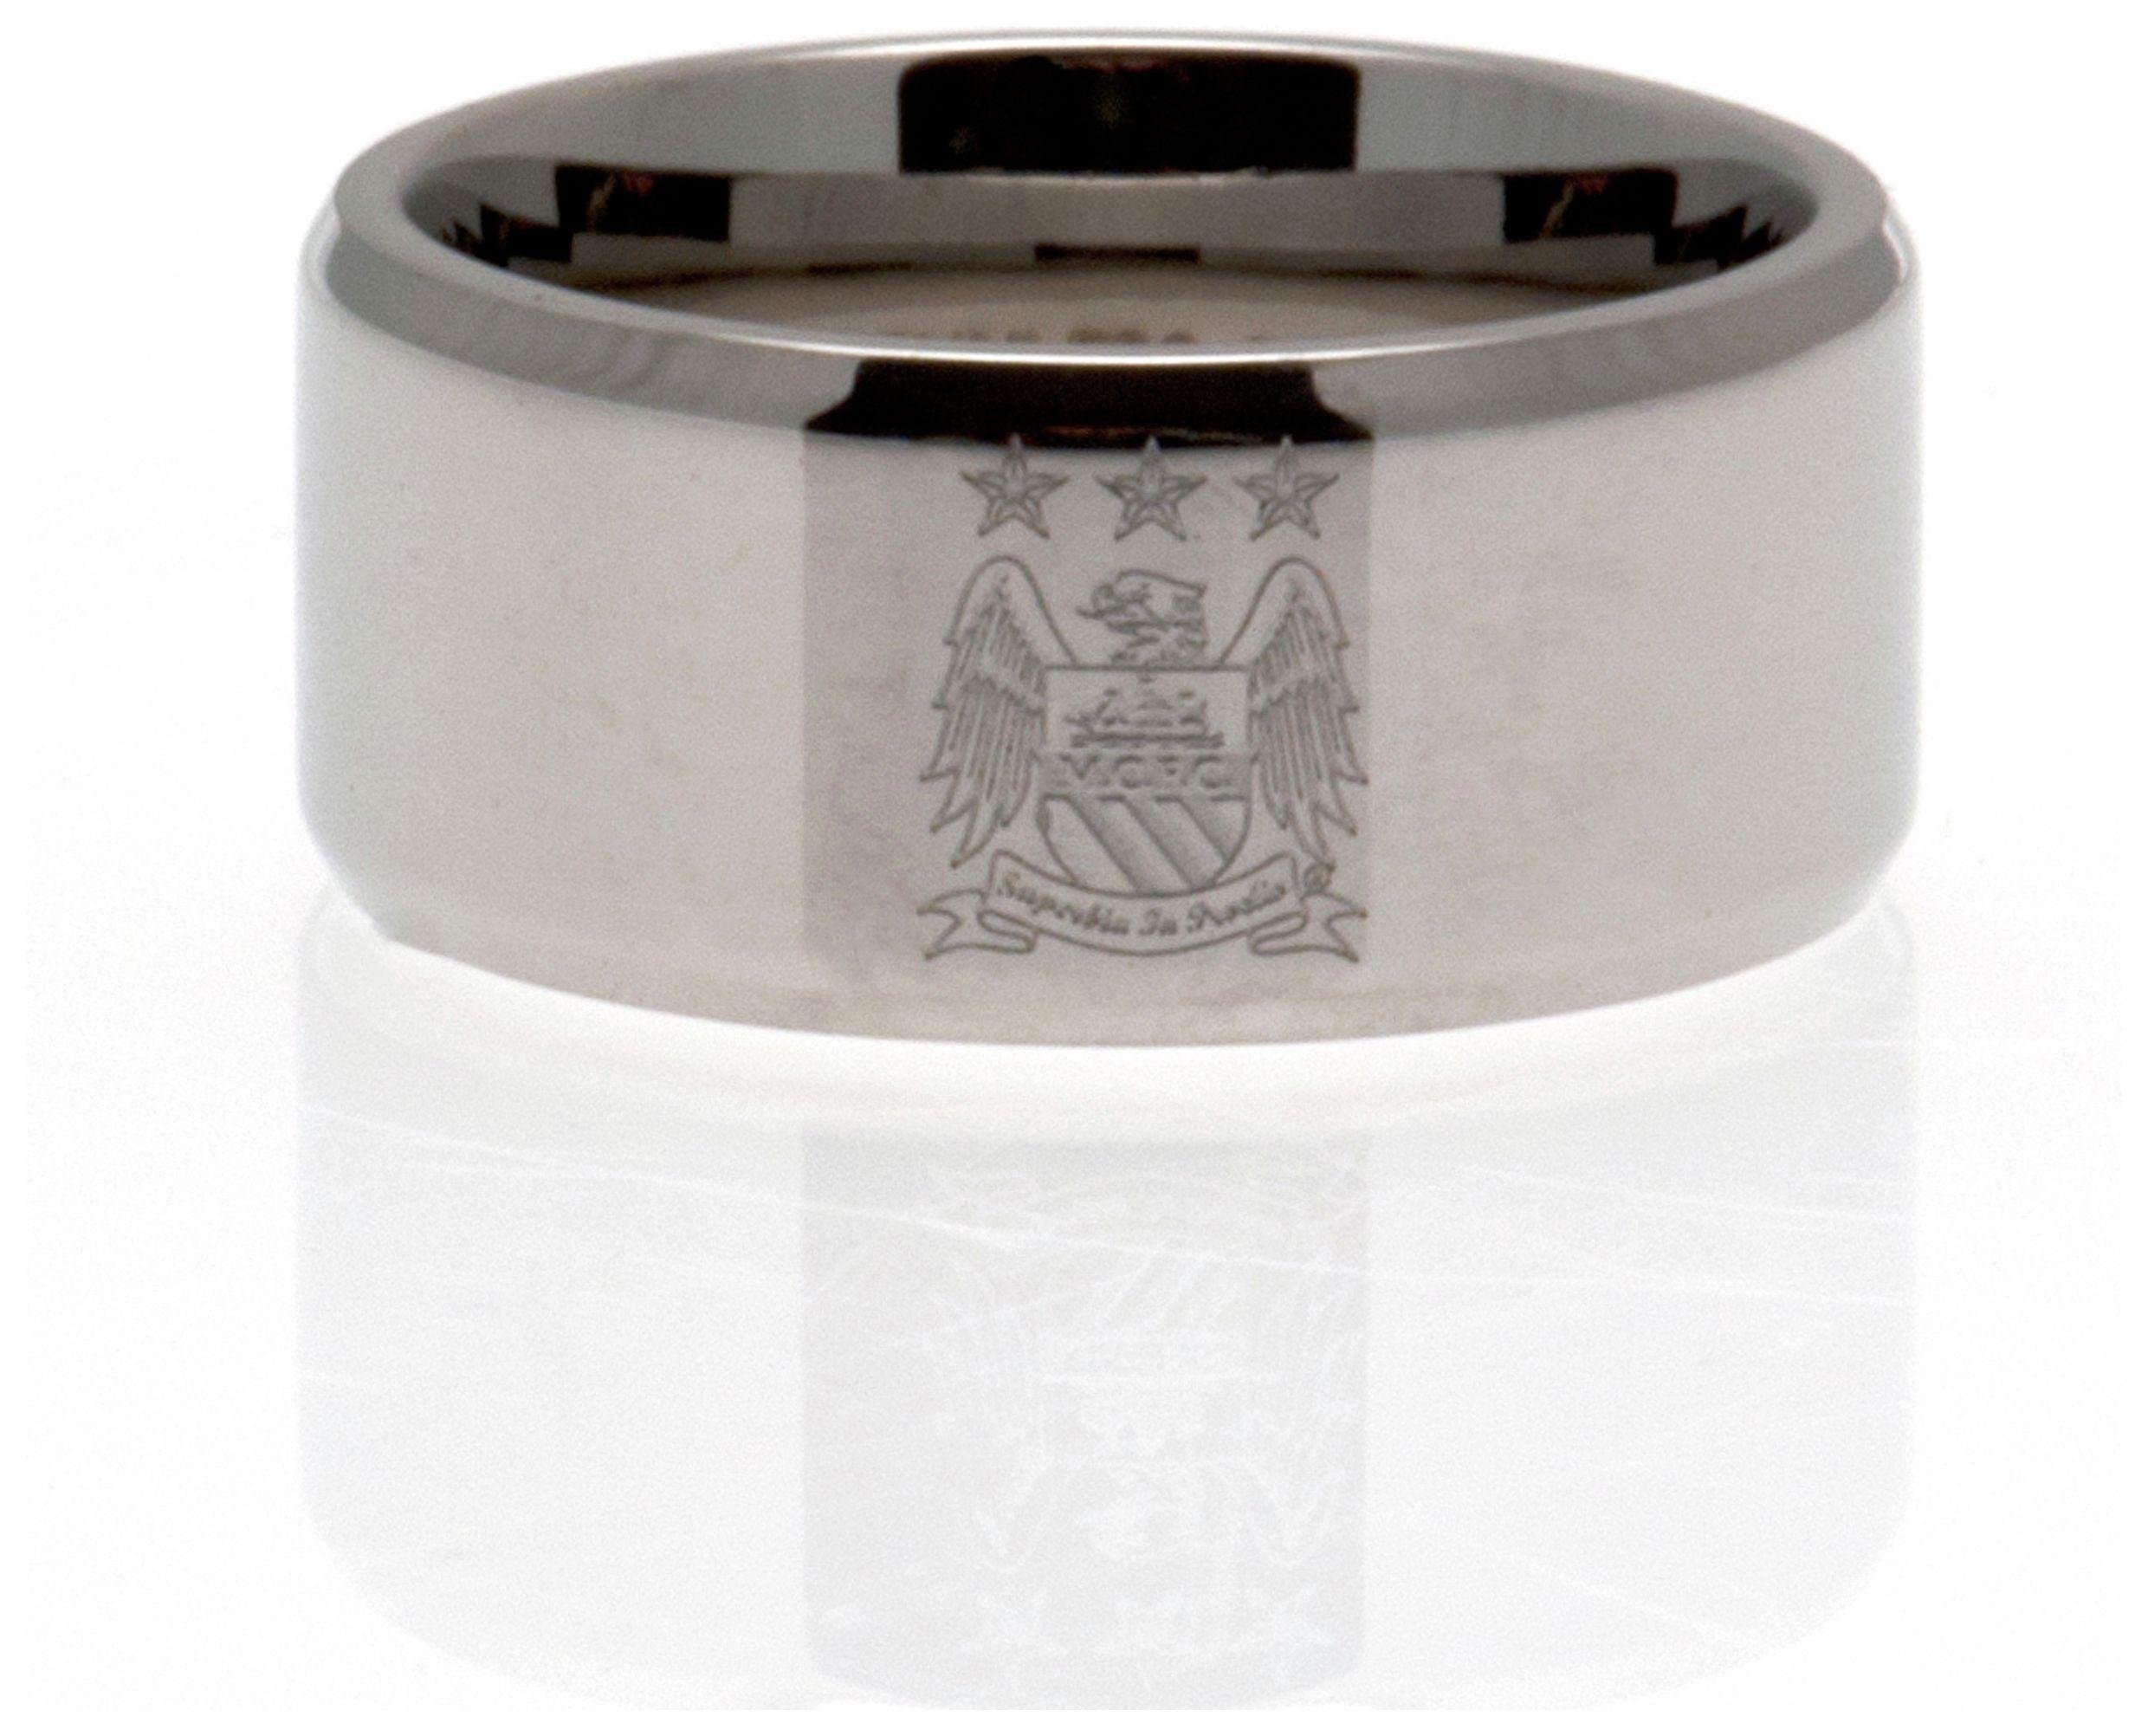 Stainless Steel Man City Ring - Size U